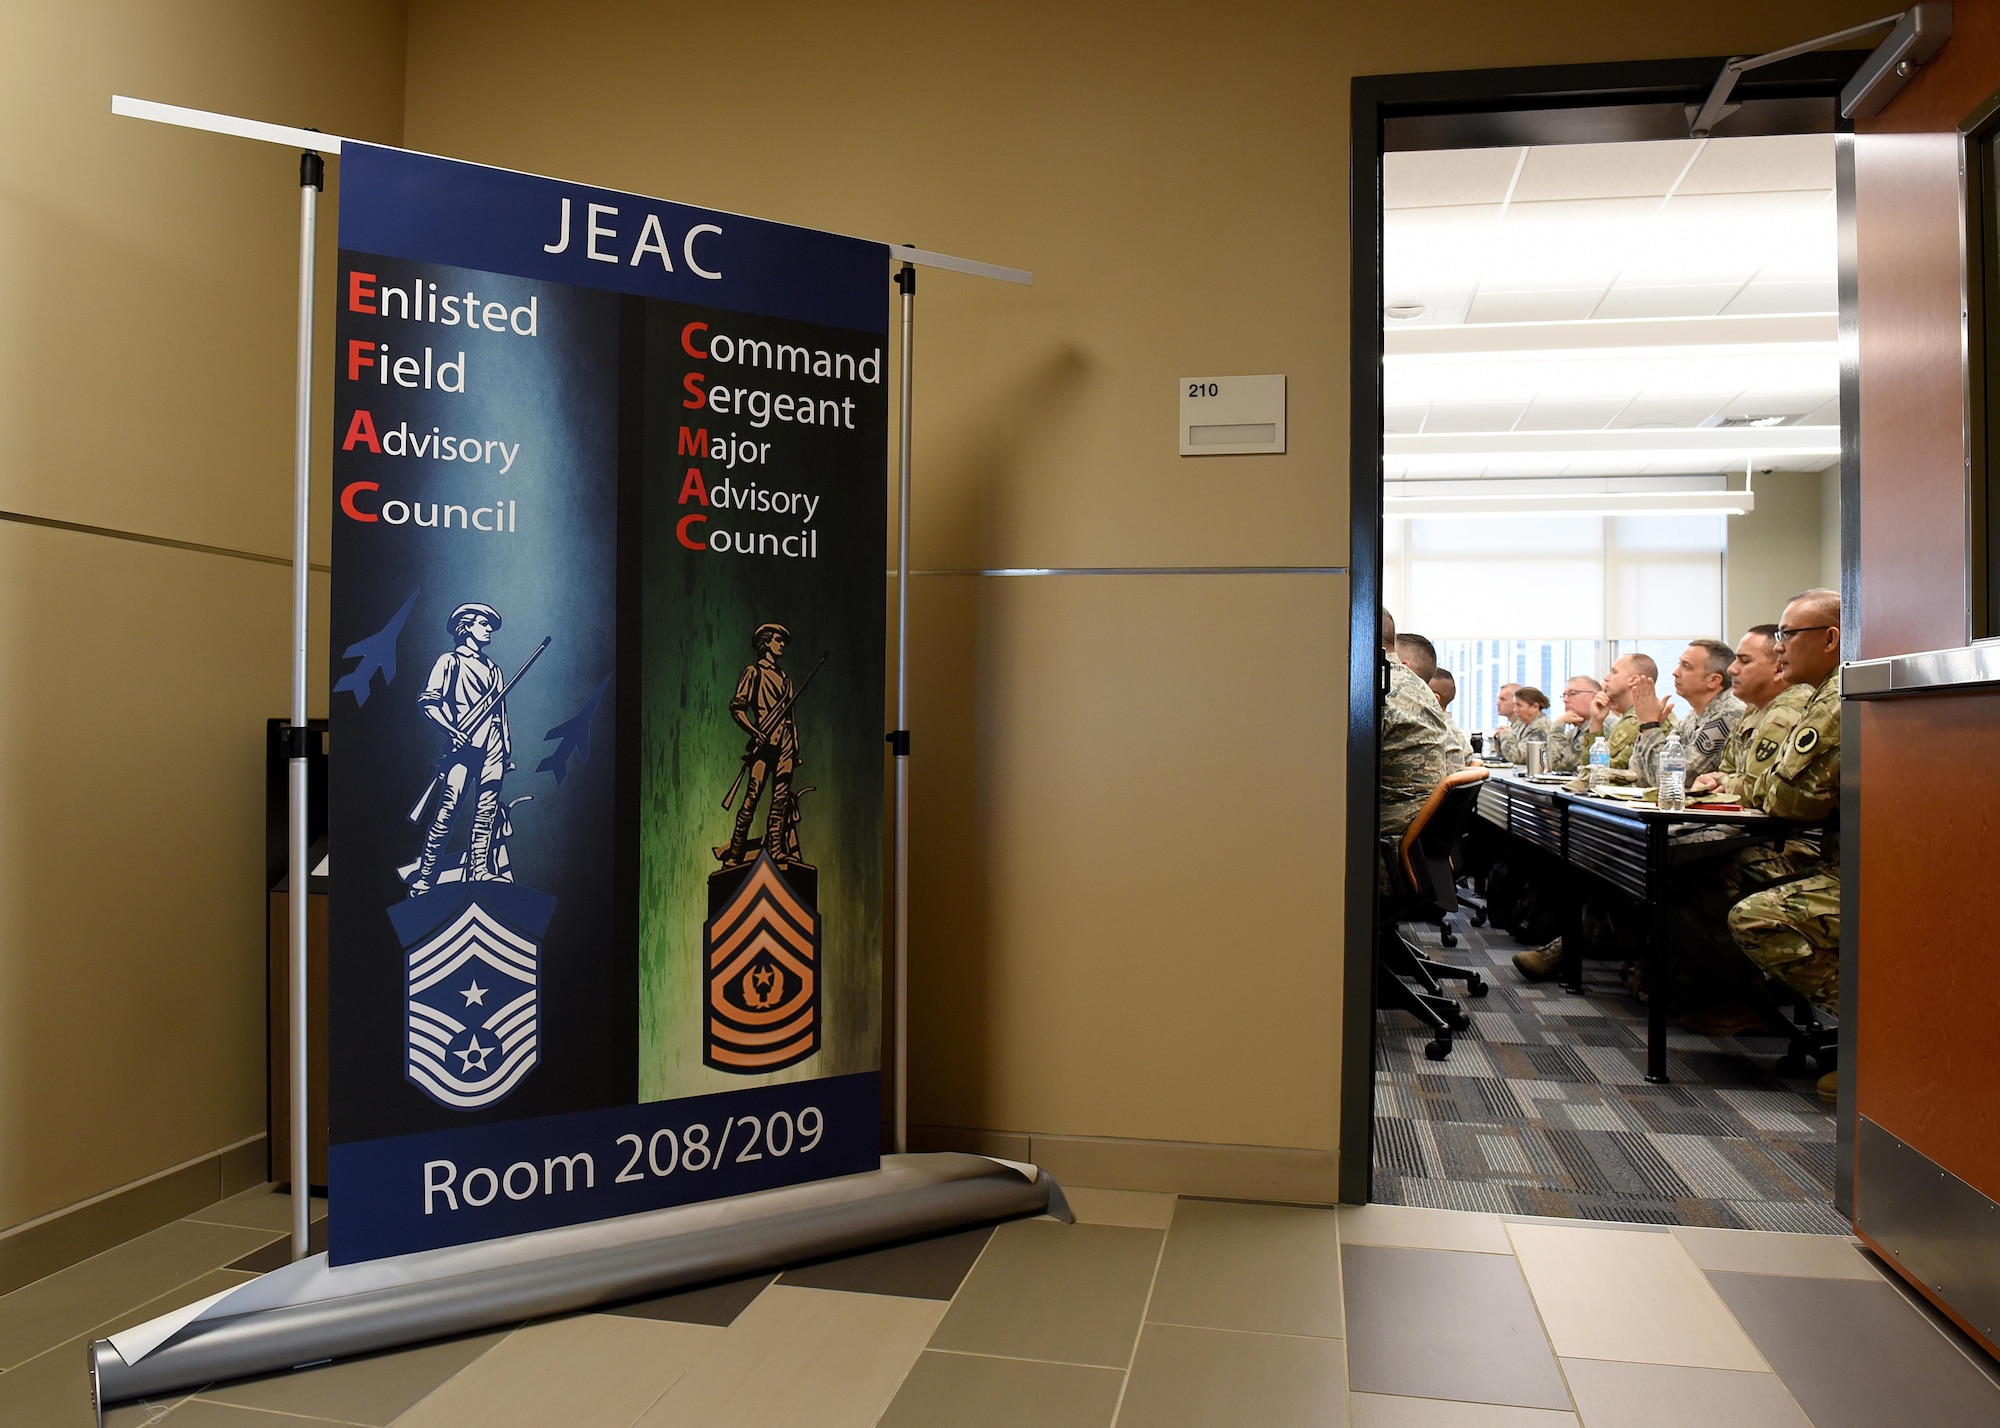 The Army and Air National Guard’s top enlisted leaders meet inside the new classroom building at the I.G. Brown Training and Education Center, May 2, 2017, in east Tennessee, for the Joint Enlisted Advisory Council. (U.S. Air National Guard photo by Master Sgt. Mike R. Smith)